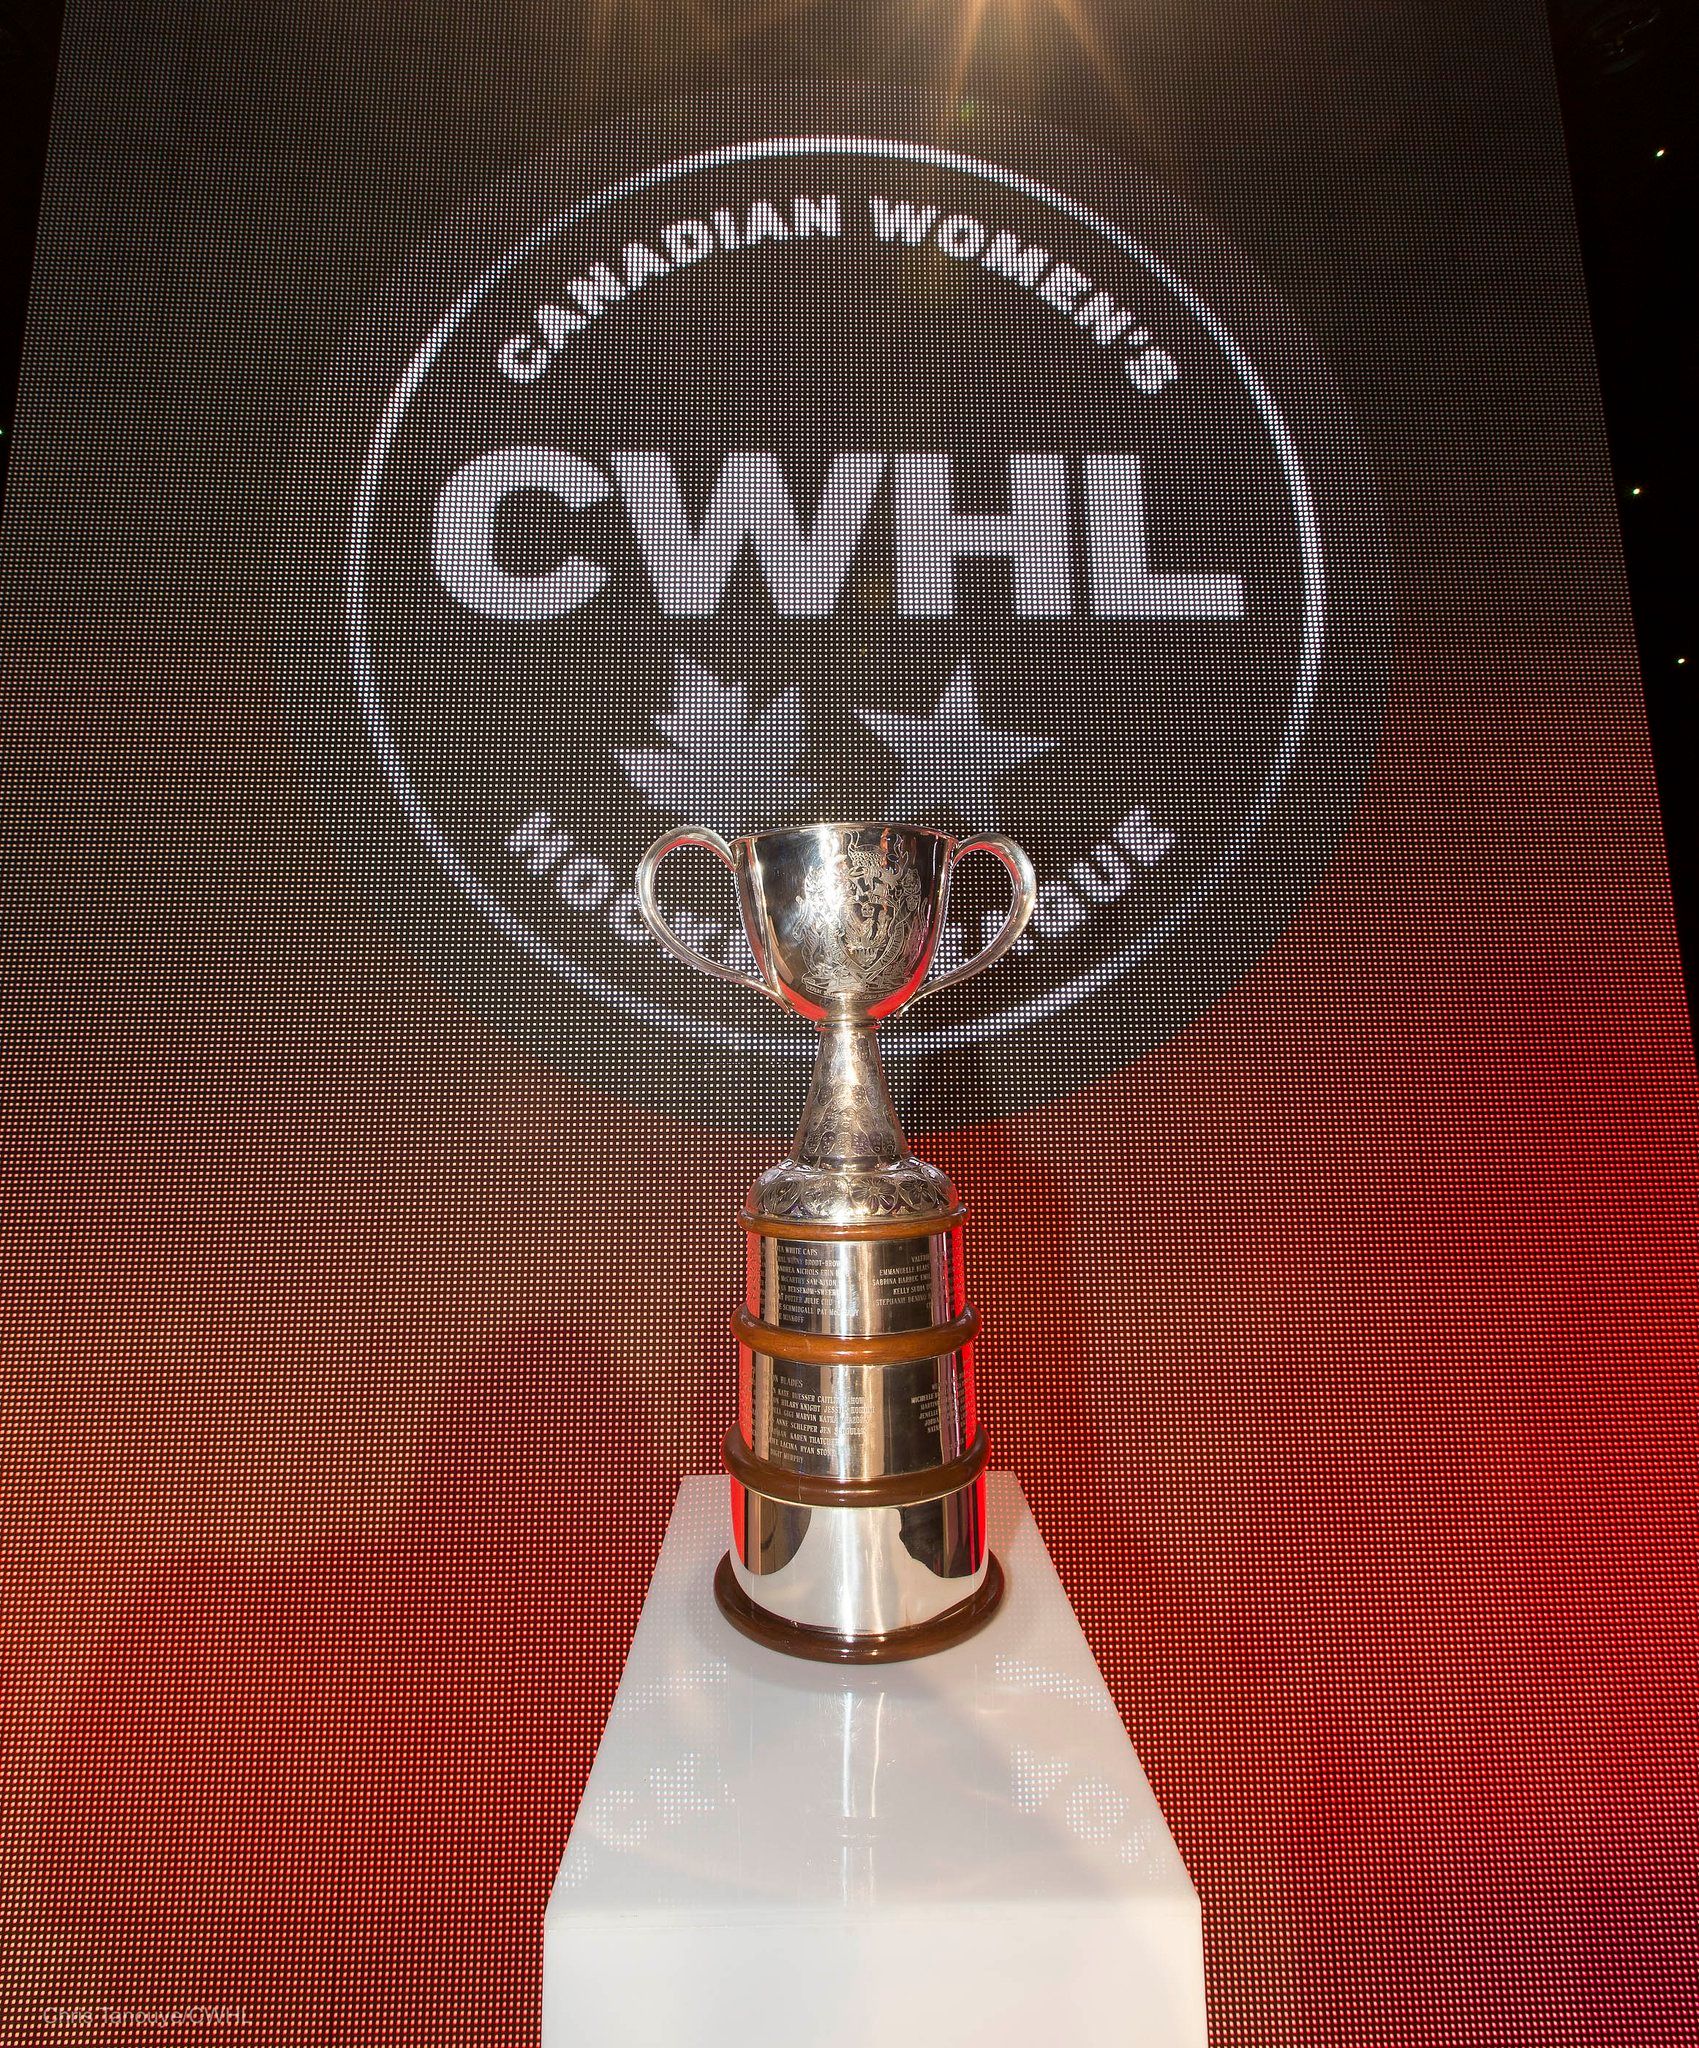 CWHL: Board of Directors Shutters League, Literally Everyone Reacts